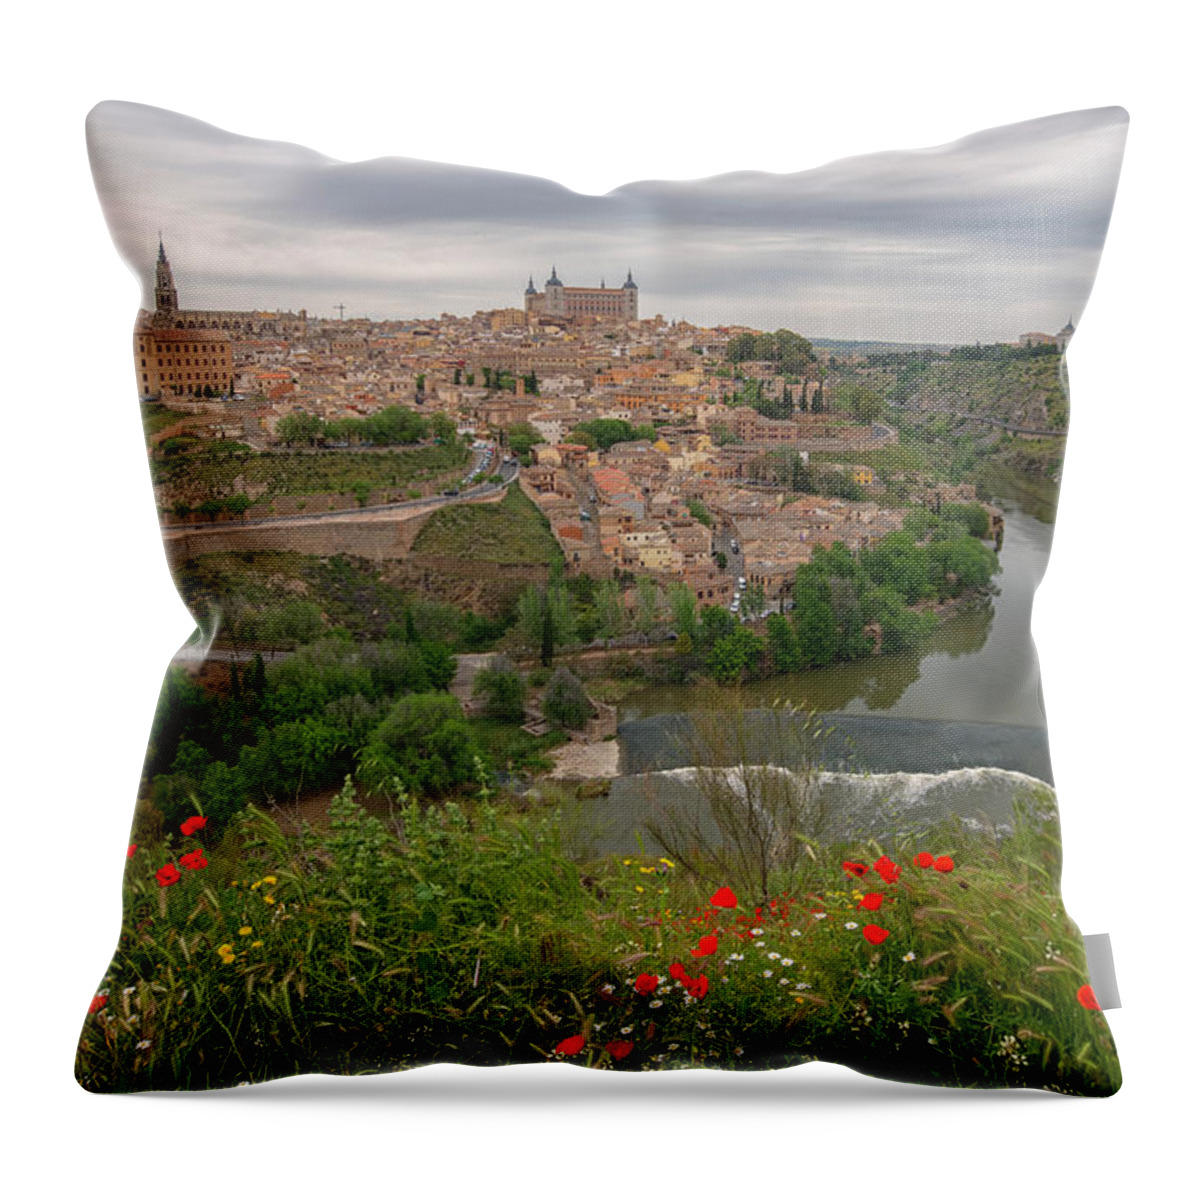 Toledo City Throw Pillow featuring the photograph Toledo City, Spain by Ivan Batinic